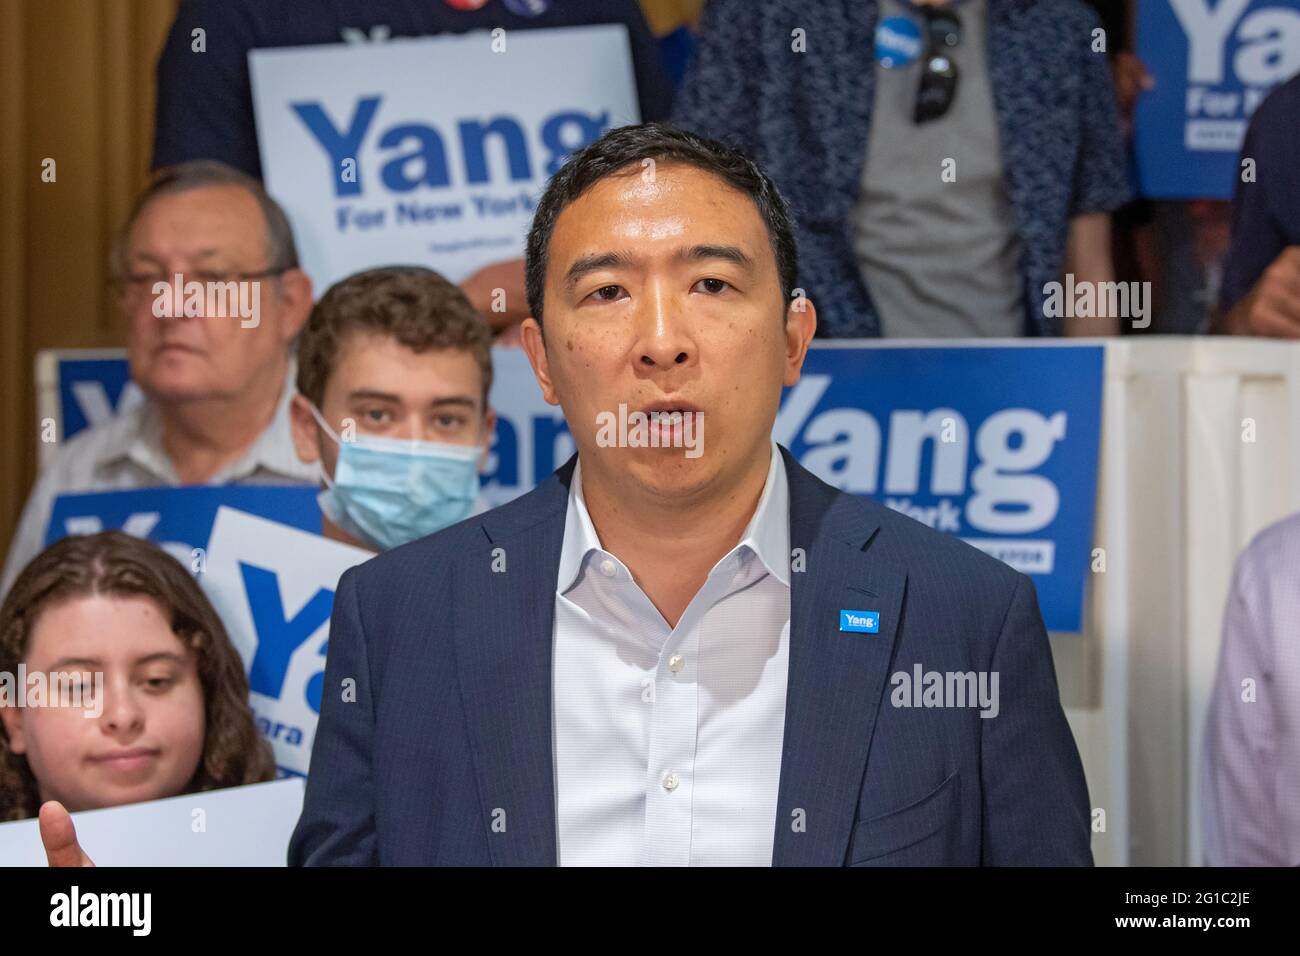 NEW YORK, NY – JUNE 06: Mayoral candidate Andrew Yang Holds media availability speaking about Rep. Alexandria Ocasio-Cortez's endorsement of Maya Wiley on June 6, 2021 in New York City.   Andrew Yang says that we need the police and 'There is no public safety without the police.'  In reference to Ms. Wiley: 'We can't keep going back to the well of the same people that run our city to the ground and expect things to change.'  In regards to Rep. Ocasio-Cortez: 'AOC has a lot of people that support and follow her and I look forward to working with her after I am mayor to solve the problems that a Stock Photo